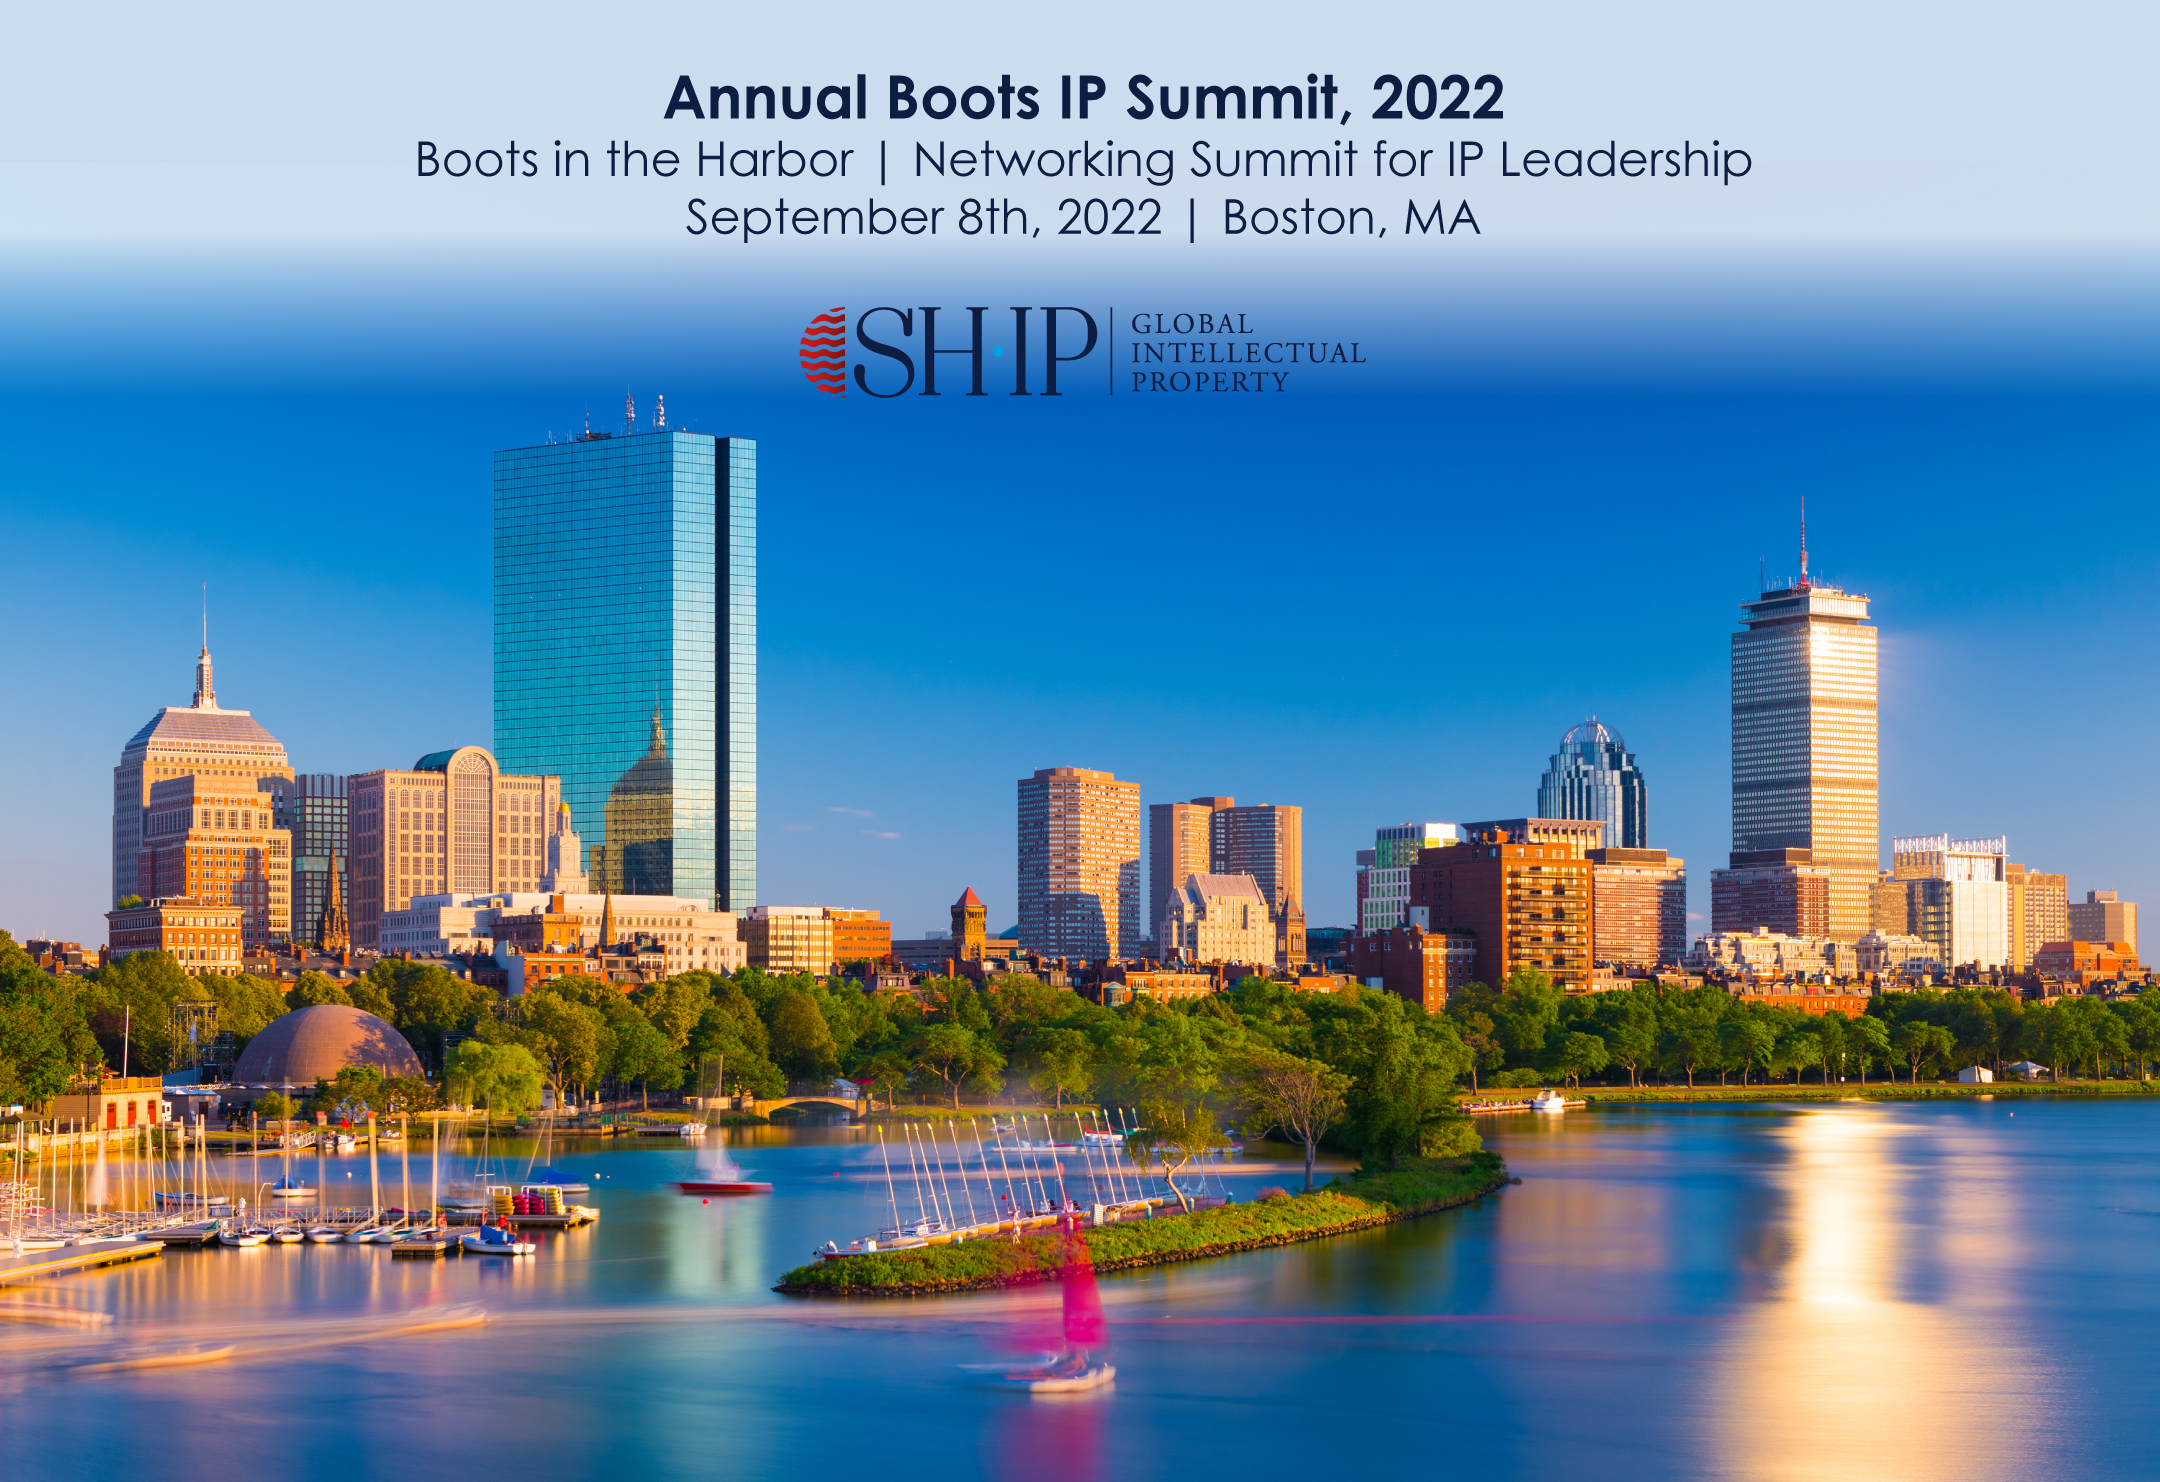 SHIP Global IP announces 2022 Annual Boots IP Summit